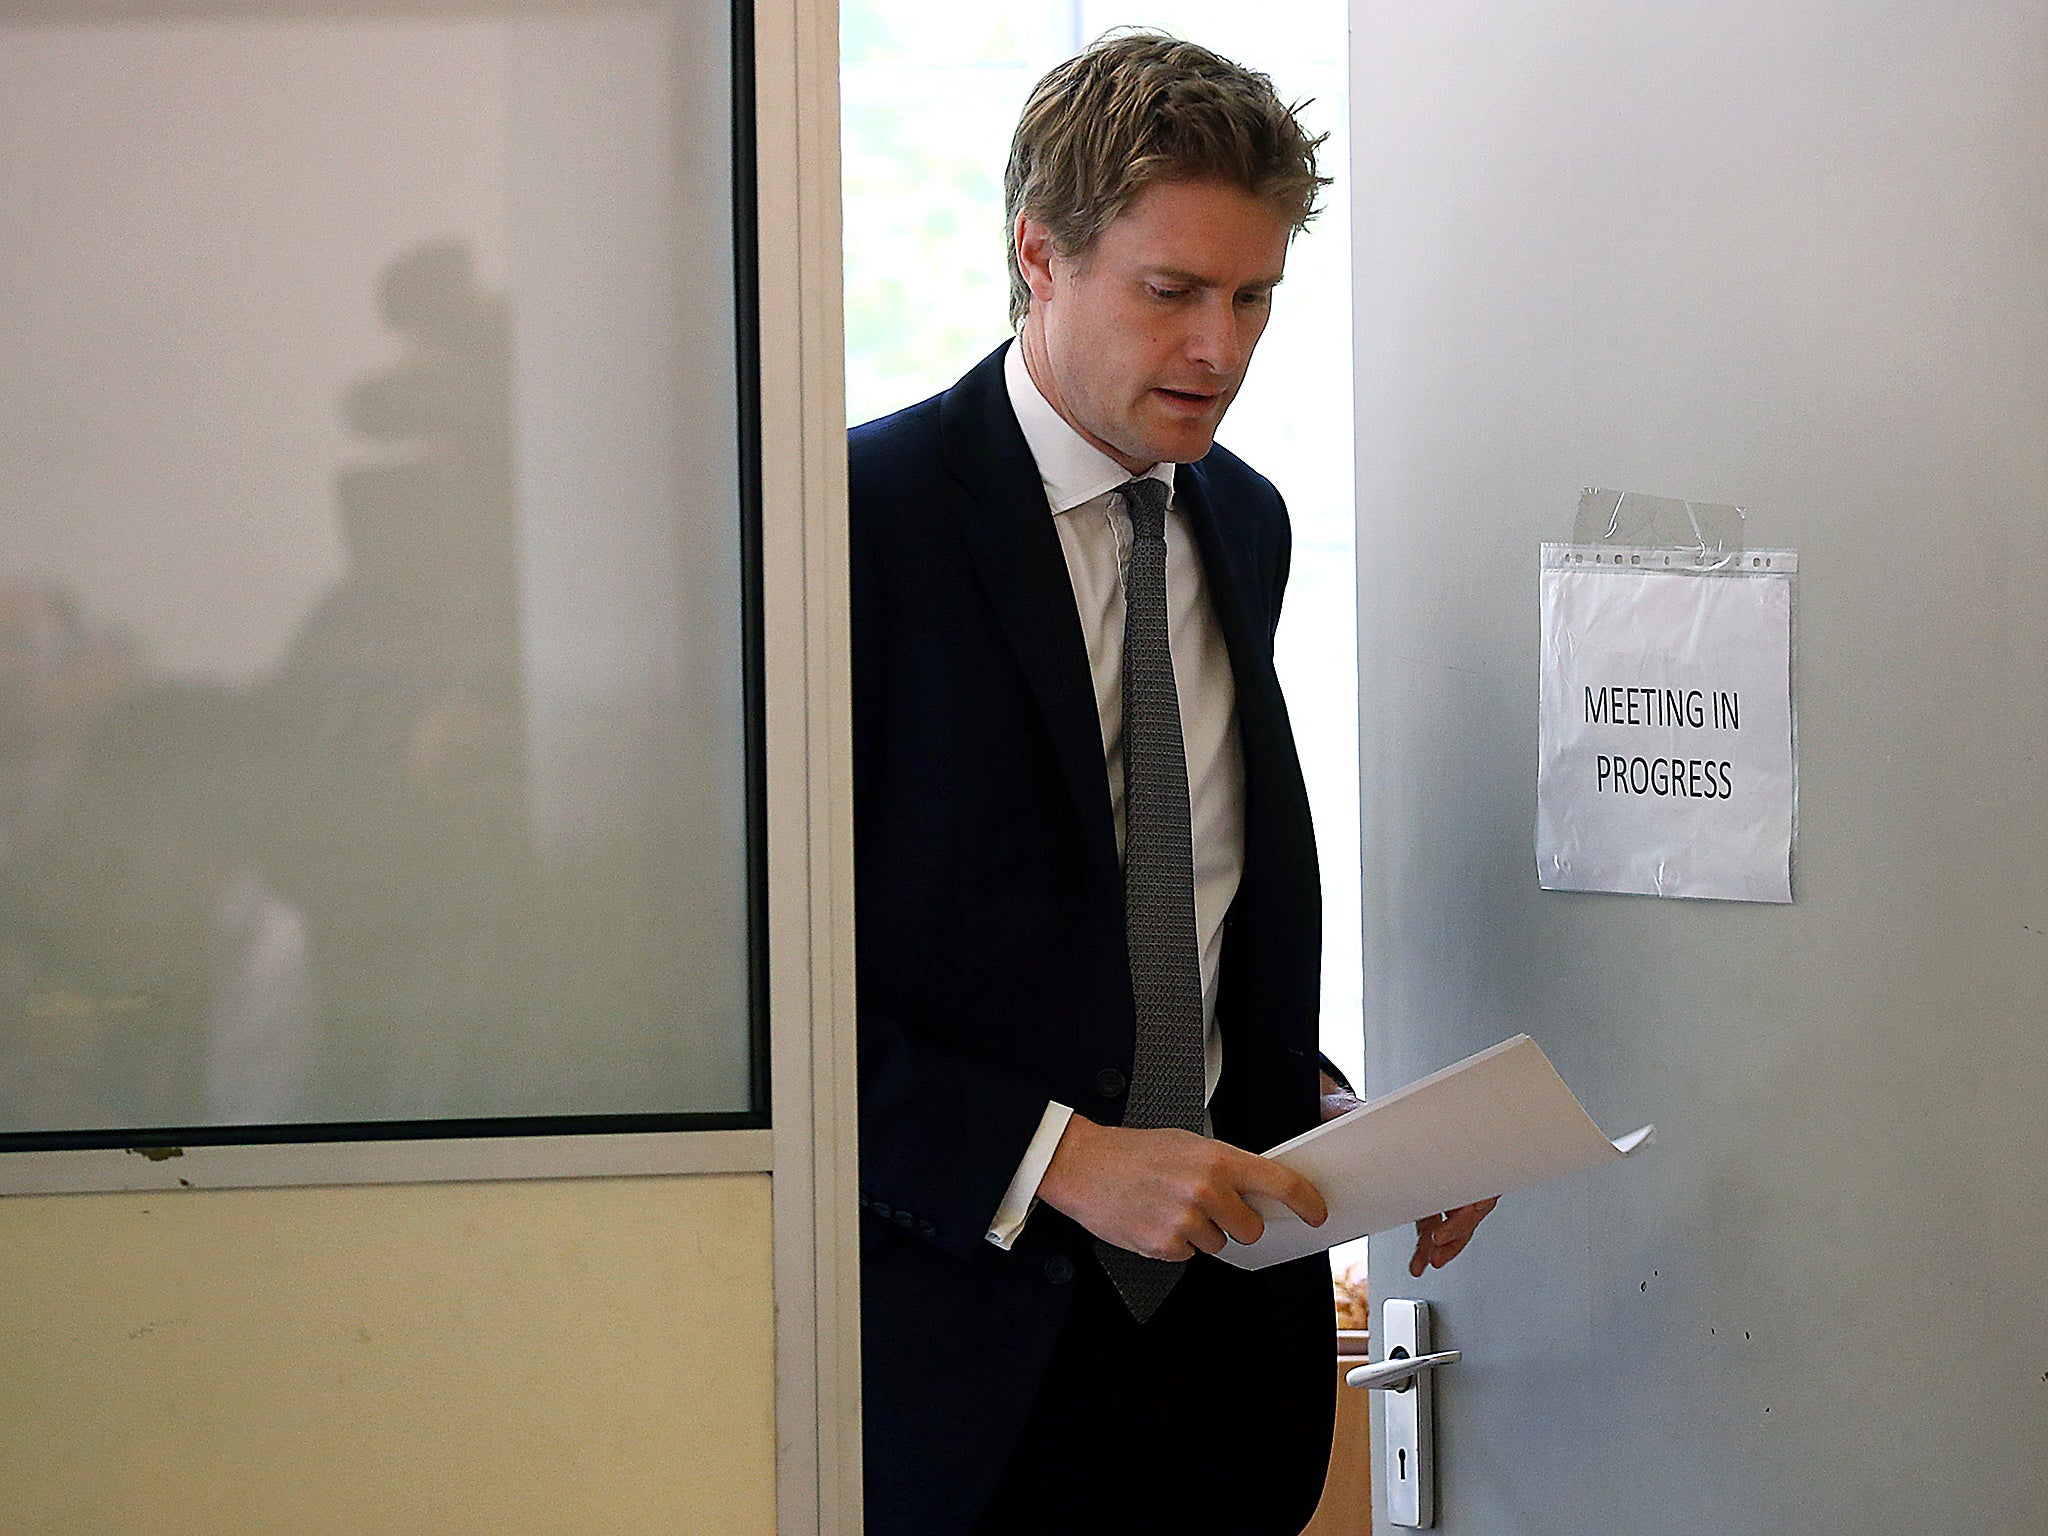 Tristram Hunt never intended to help out Jeremy Corbyn